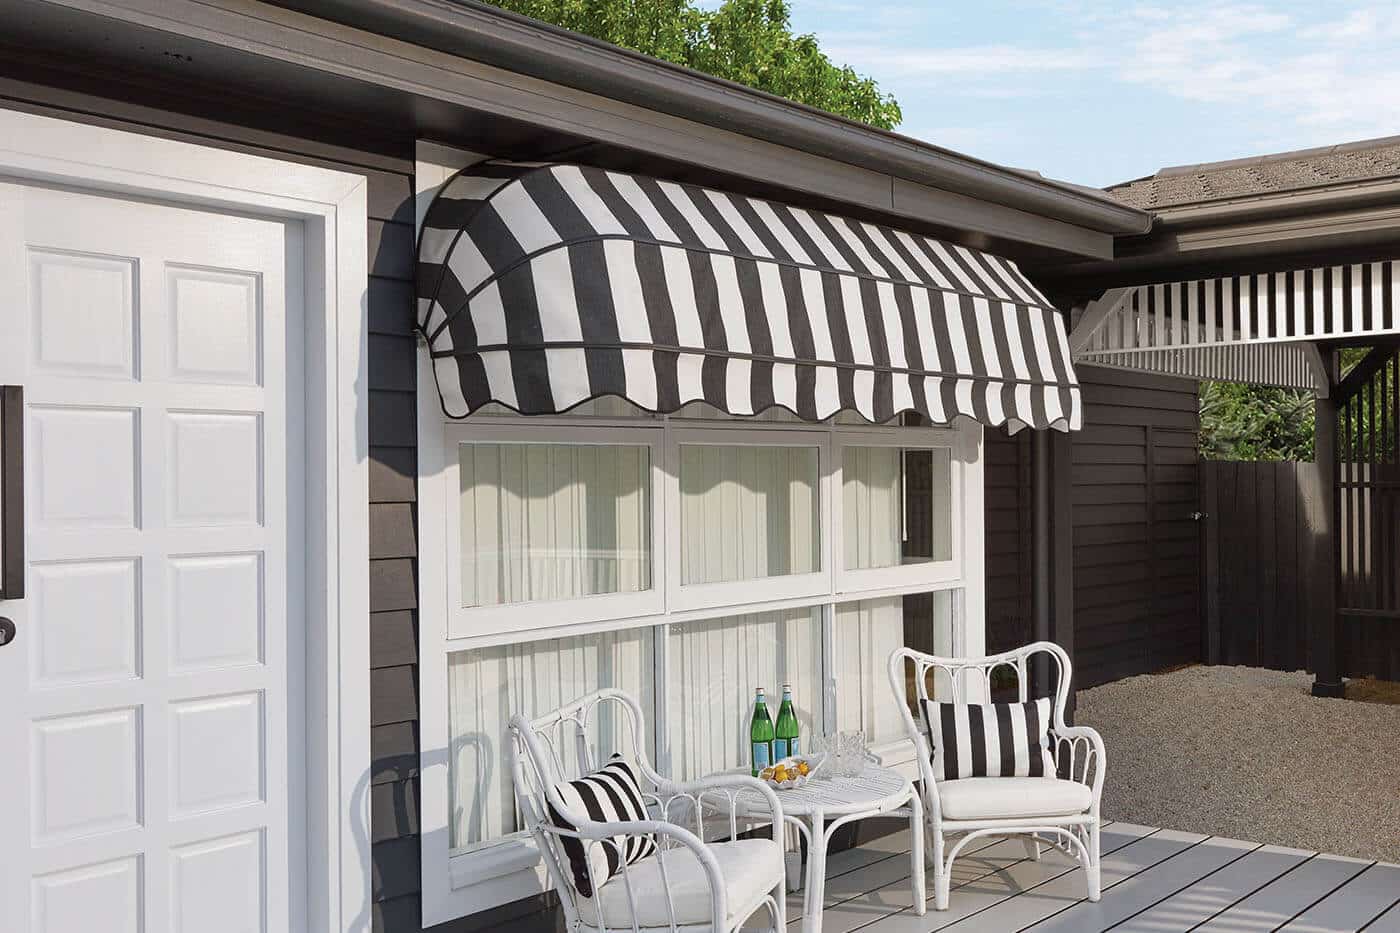 Outside view of a mid-century style home featuring Canopy Awning with black and white stripes design covering a large window pane, providing shade. Available at Complete Blinds Brisbane.